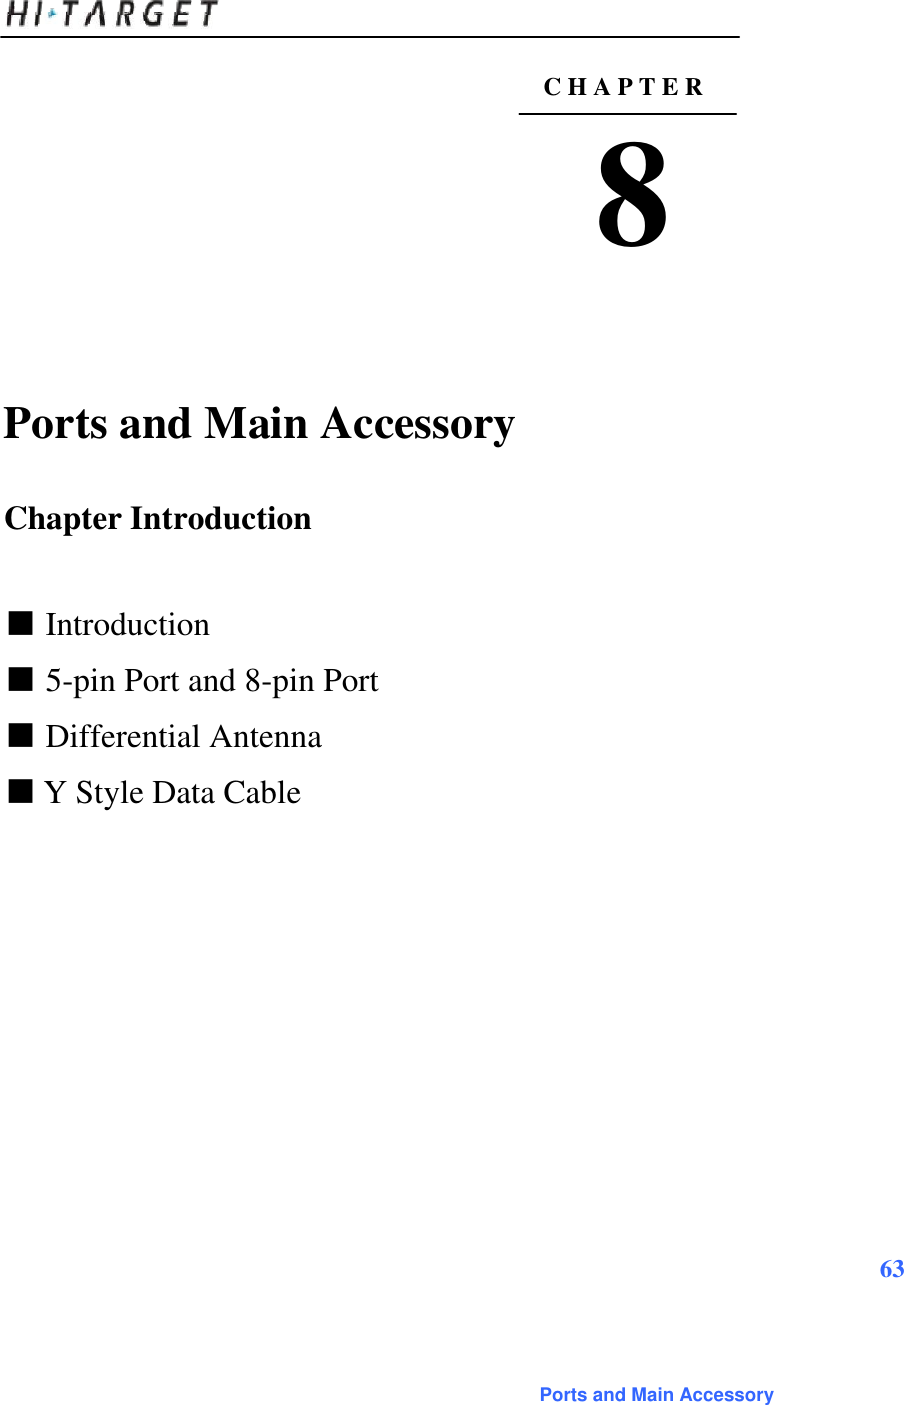   C H A P T E R  8      Ports and Main Accessory   Chapter Introduction    ■ Introduction  ■ 5-pin Port and 8-pin Port  ■ Differential Antenna  ■ Y Style Data Cable                      63     Ports and Main Accessory 